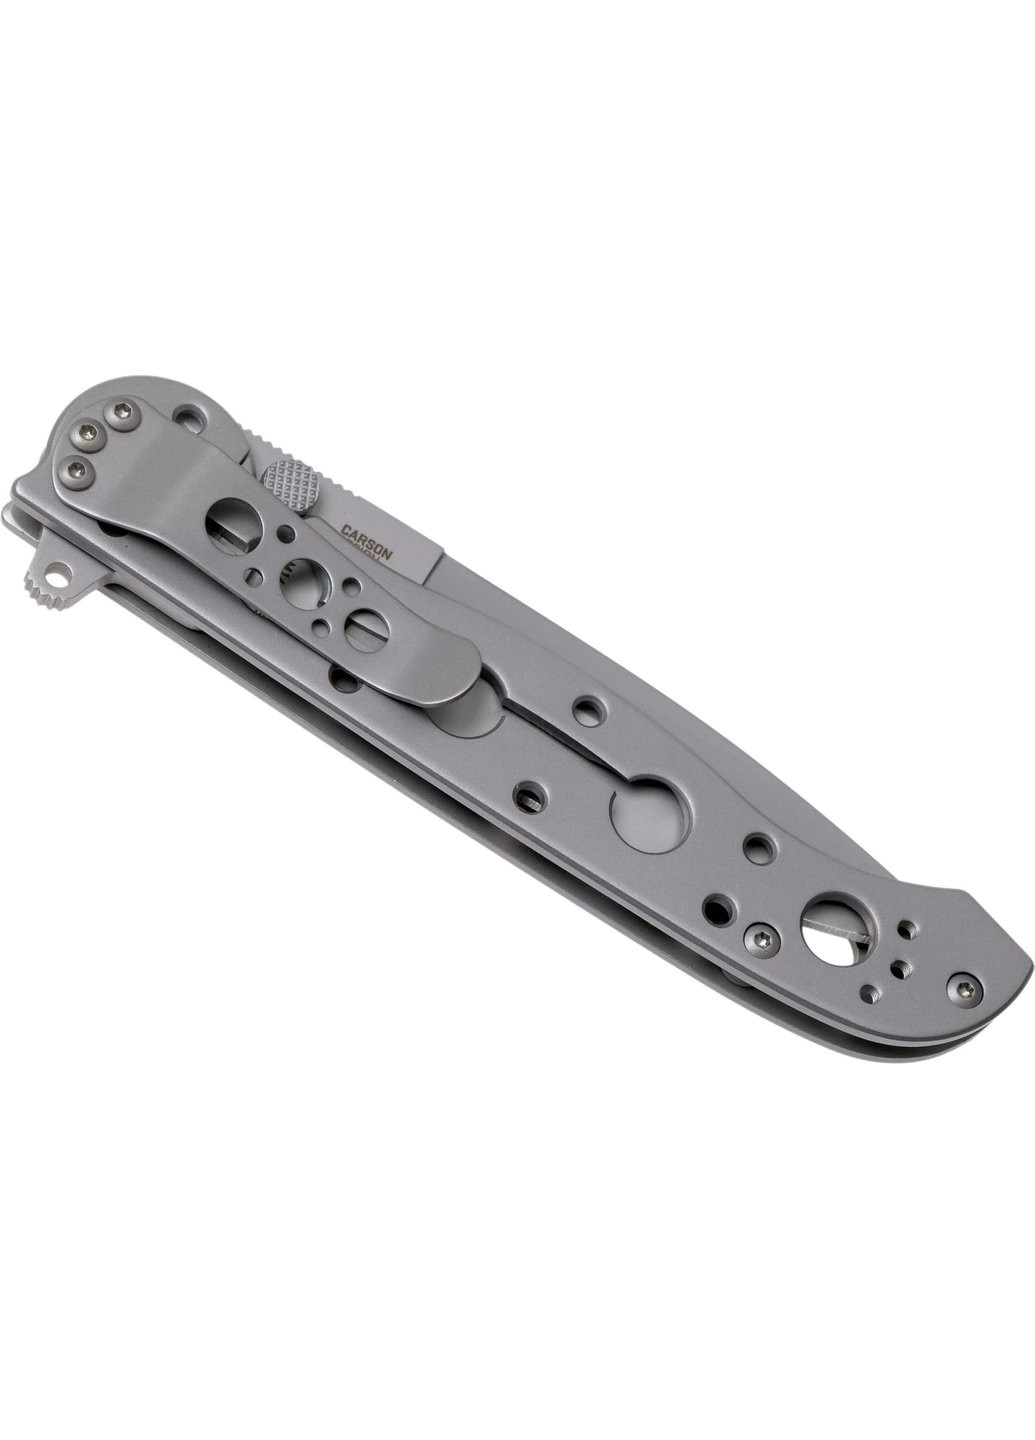 Нож M16 Silver Stainless Steel (M16-03SS) CRKT (257256958)